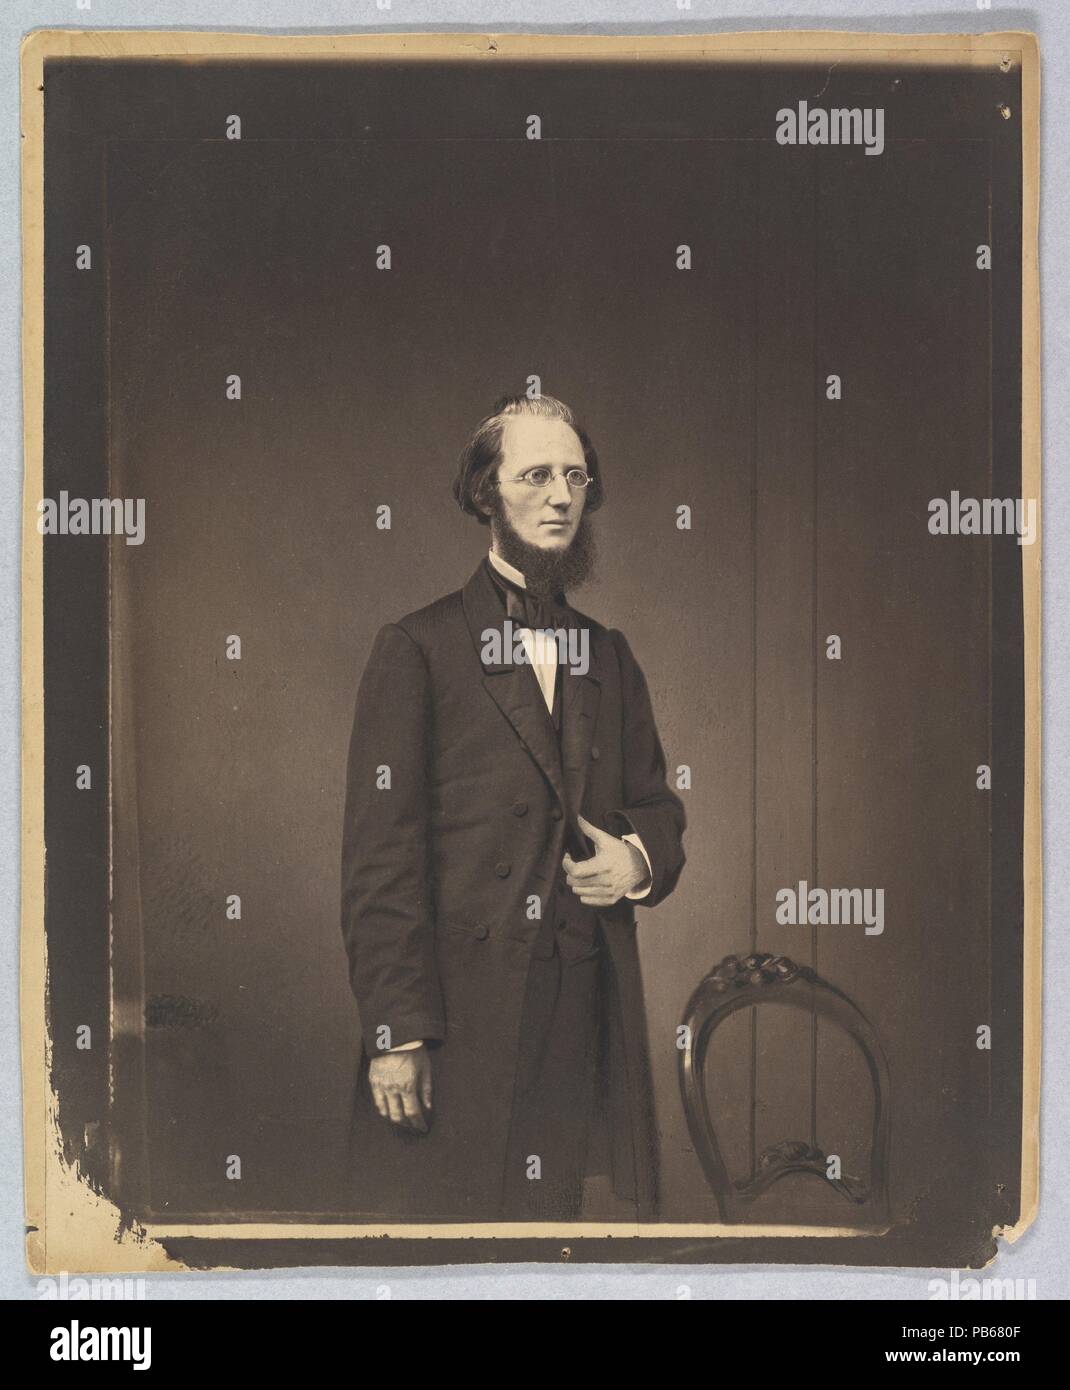 [Portrait of a Man]. Artist: Mathew B. Brady (American, born Ireland, 1823?-1896 New York). Dimensions: Mount: 11 3/16 in. × 9 1/8 in. (28.4 × 23.2 cm)  Image: 9 15/16 × 7 9/16 in. (25.3 × 19.2 cm). Date: ca. 1857.  The identity of this soberly dressed man is unknown, but Brady's careful artistry suggests a man of intellect and faith. In the darkly lit space of the studio it is the young man's visage--and by extension, his mind--that is the focus of the picture, not stylish clothing or studio decor. Apart from a simple but tastefully elegant chair and two vertical lines vaguely suggesting some Stock Photo